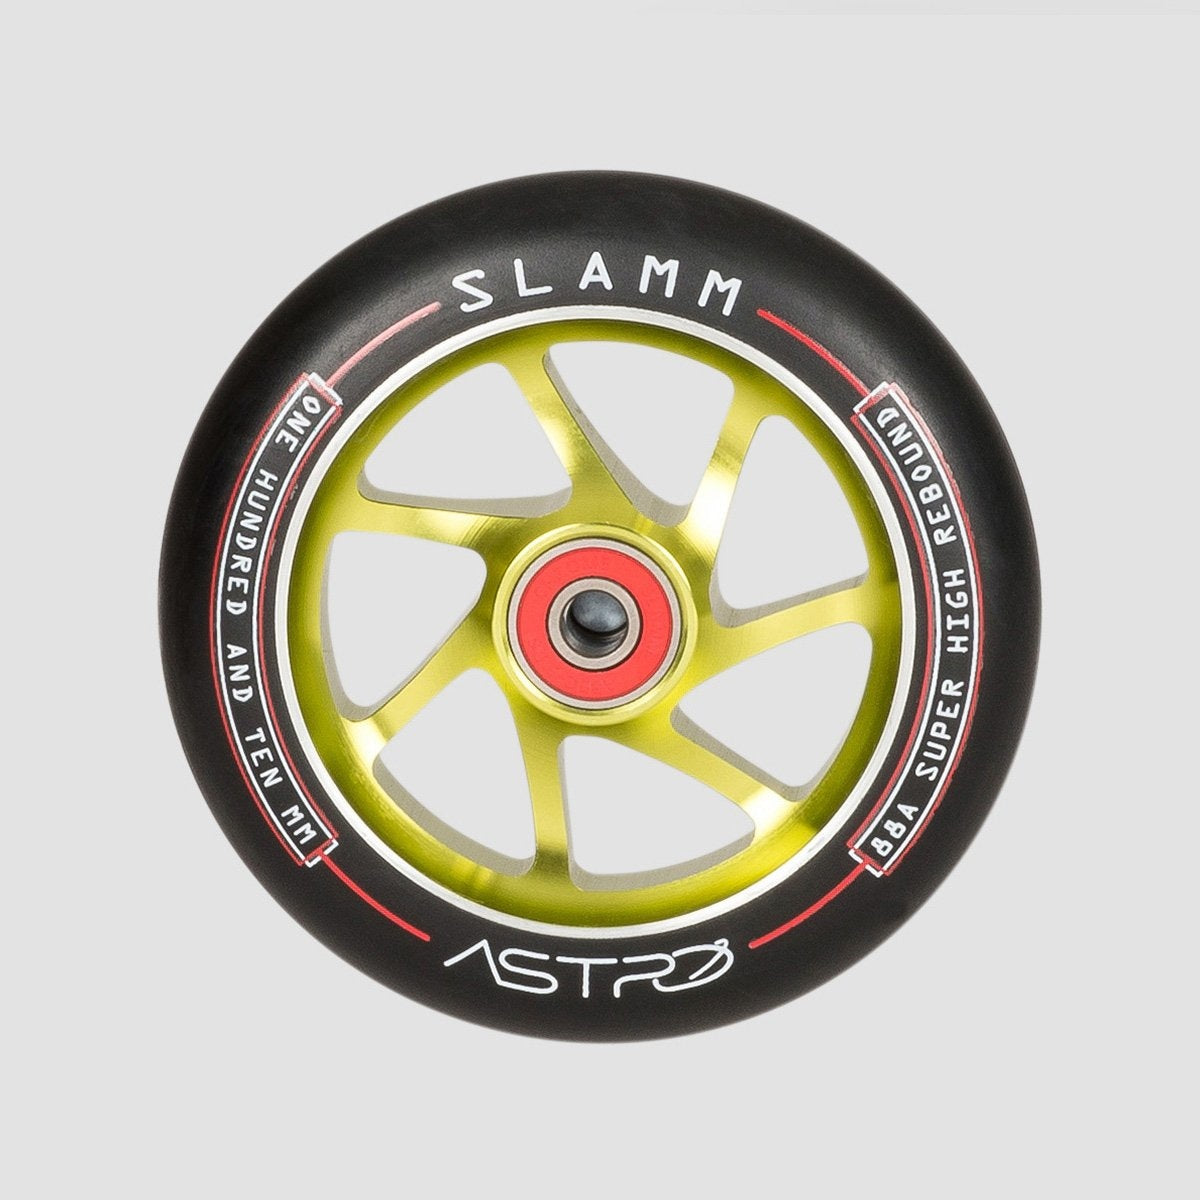 Slamm Astro Scooter Wheel x1 Green 110mm - Scooter